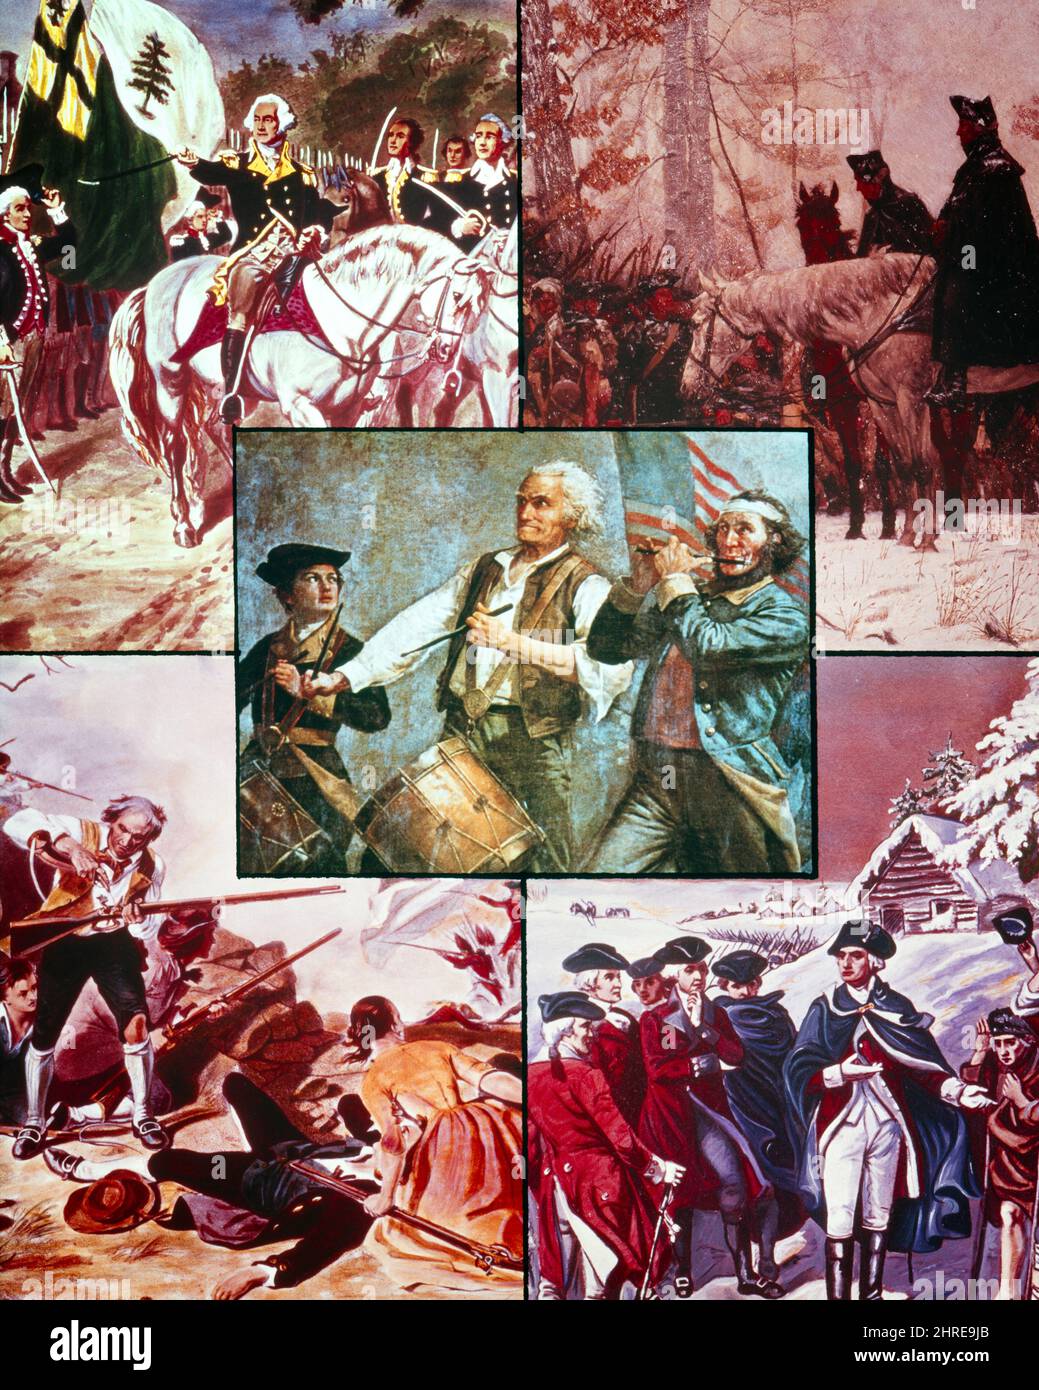 1770s MONTAGE OF VARIOUS AMERICAN REVOLUTIONARY WAR ILLUSTRATIONS WITH SPIRIT OF 76 IN THE CENTER - kh5770 HAR001 HARS 1776 PATRIOT POLITICS WAR OF INDEPENDENCE CONCEPTUAL FIFE PATRIOTIC REVOLUTIONARY WAR VARIOUS GEORGE WASHINGTON REVOLT AMERICAN REVOLUTIONARY WAR 1770s 76 COLONIES MA PATRIOTISM STATESMAN BATTLE OF LEXINGTON FOUNDING FATHER HAR001 OLD FASHIONED VIRGINIAN Stock Photo